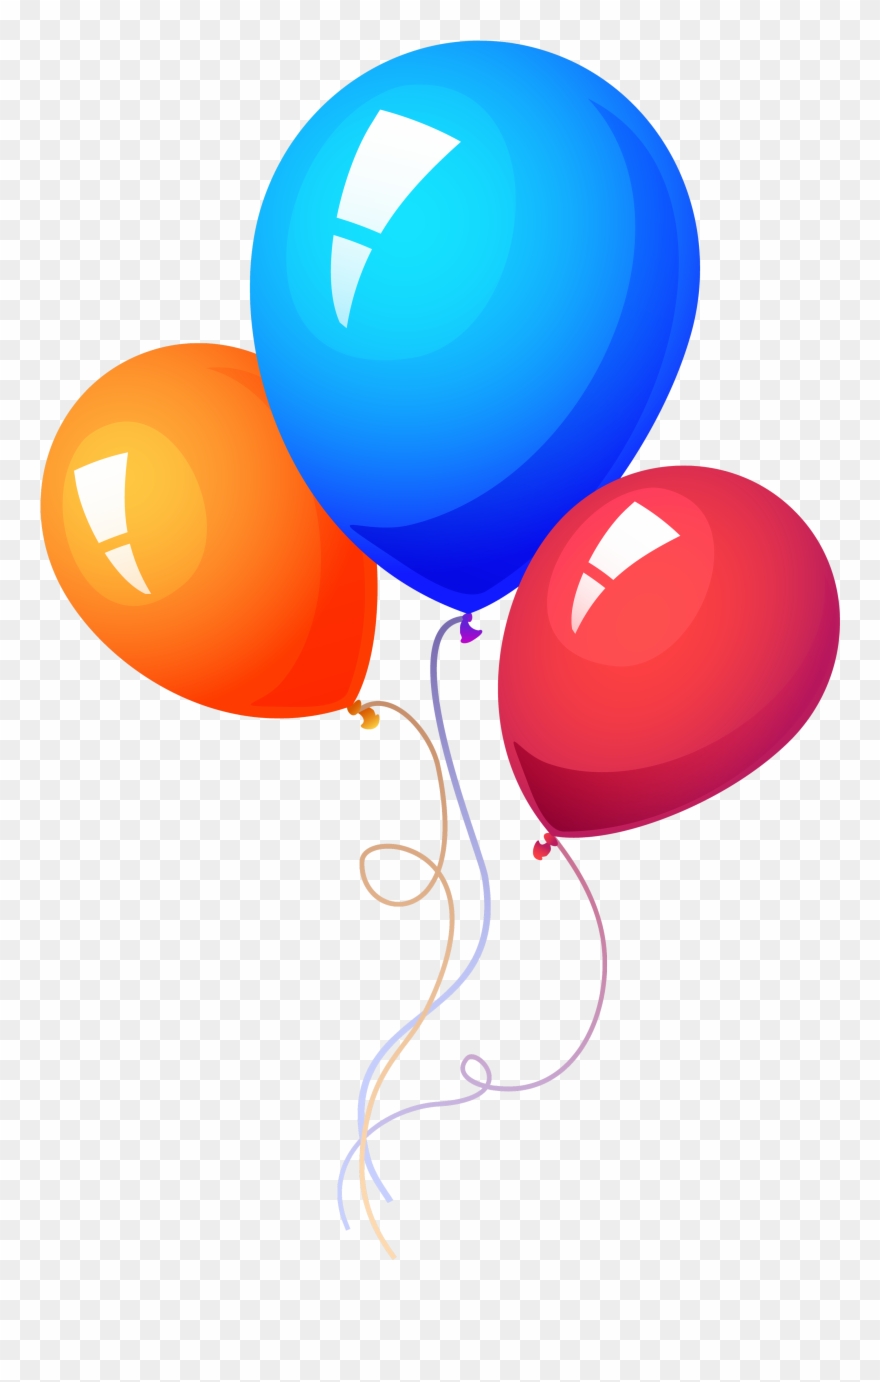 Balloon Images Png